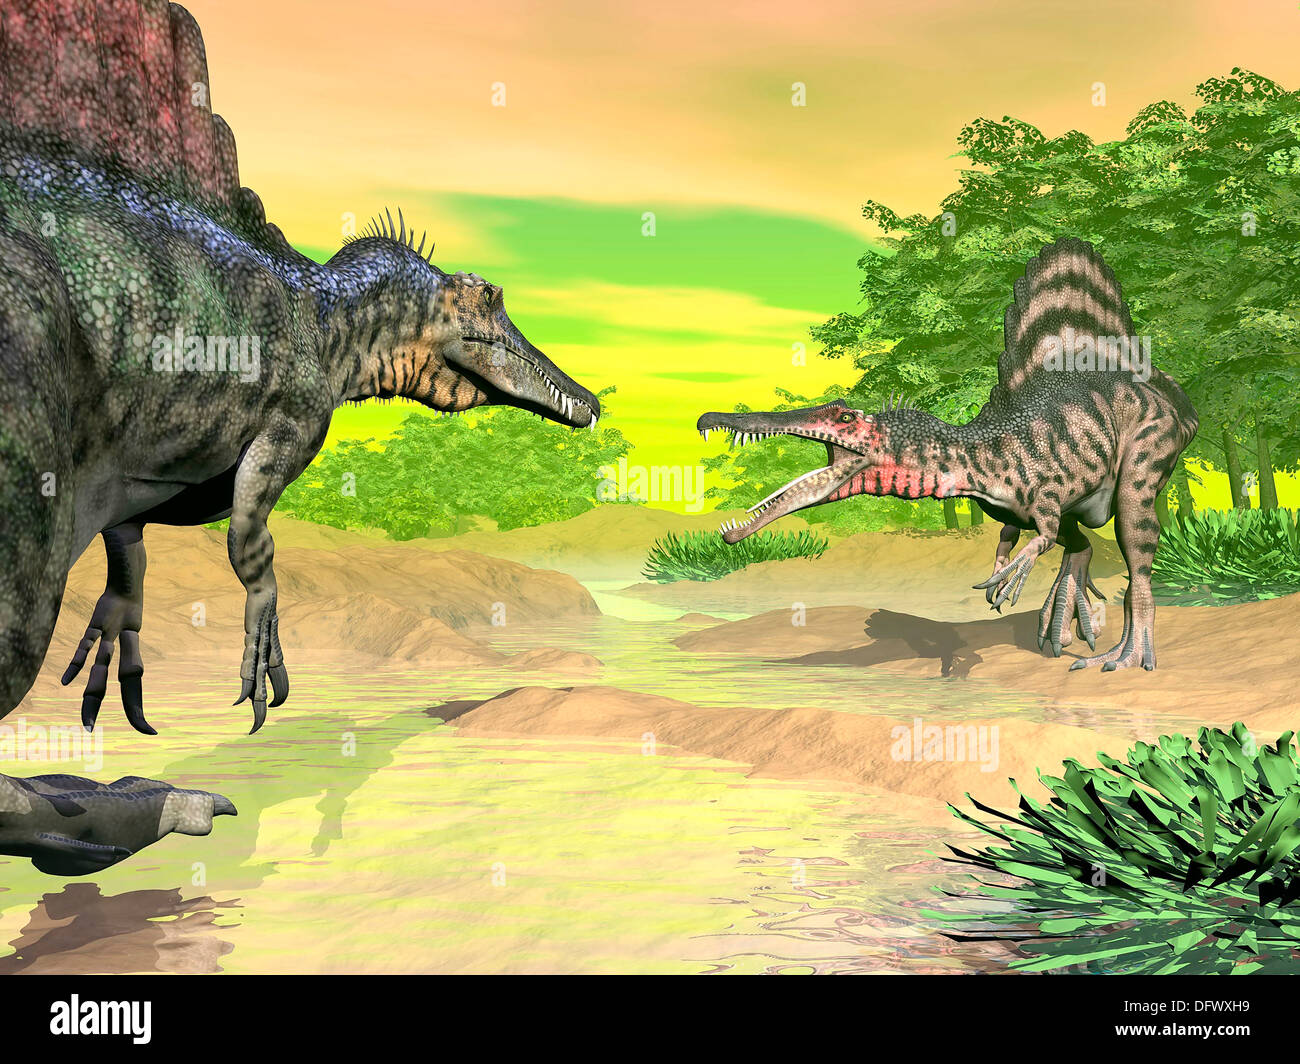 Two Spinosaurus dinosaurs confront each other face to face in a prehistoric environment. Stock Photo